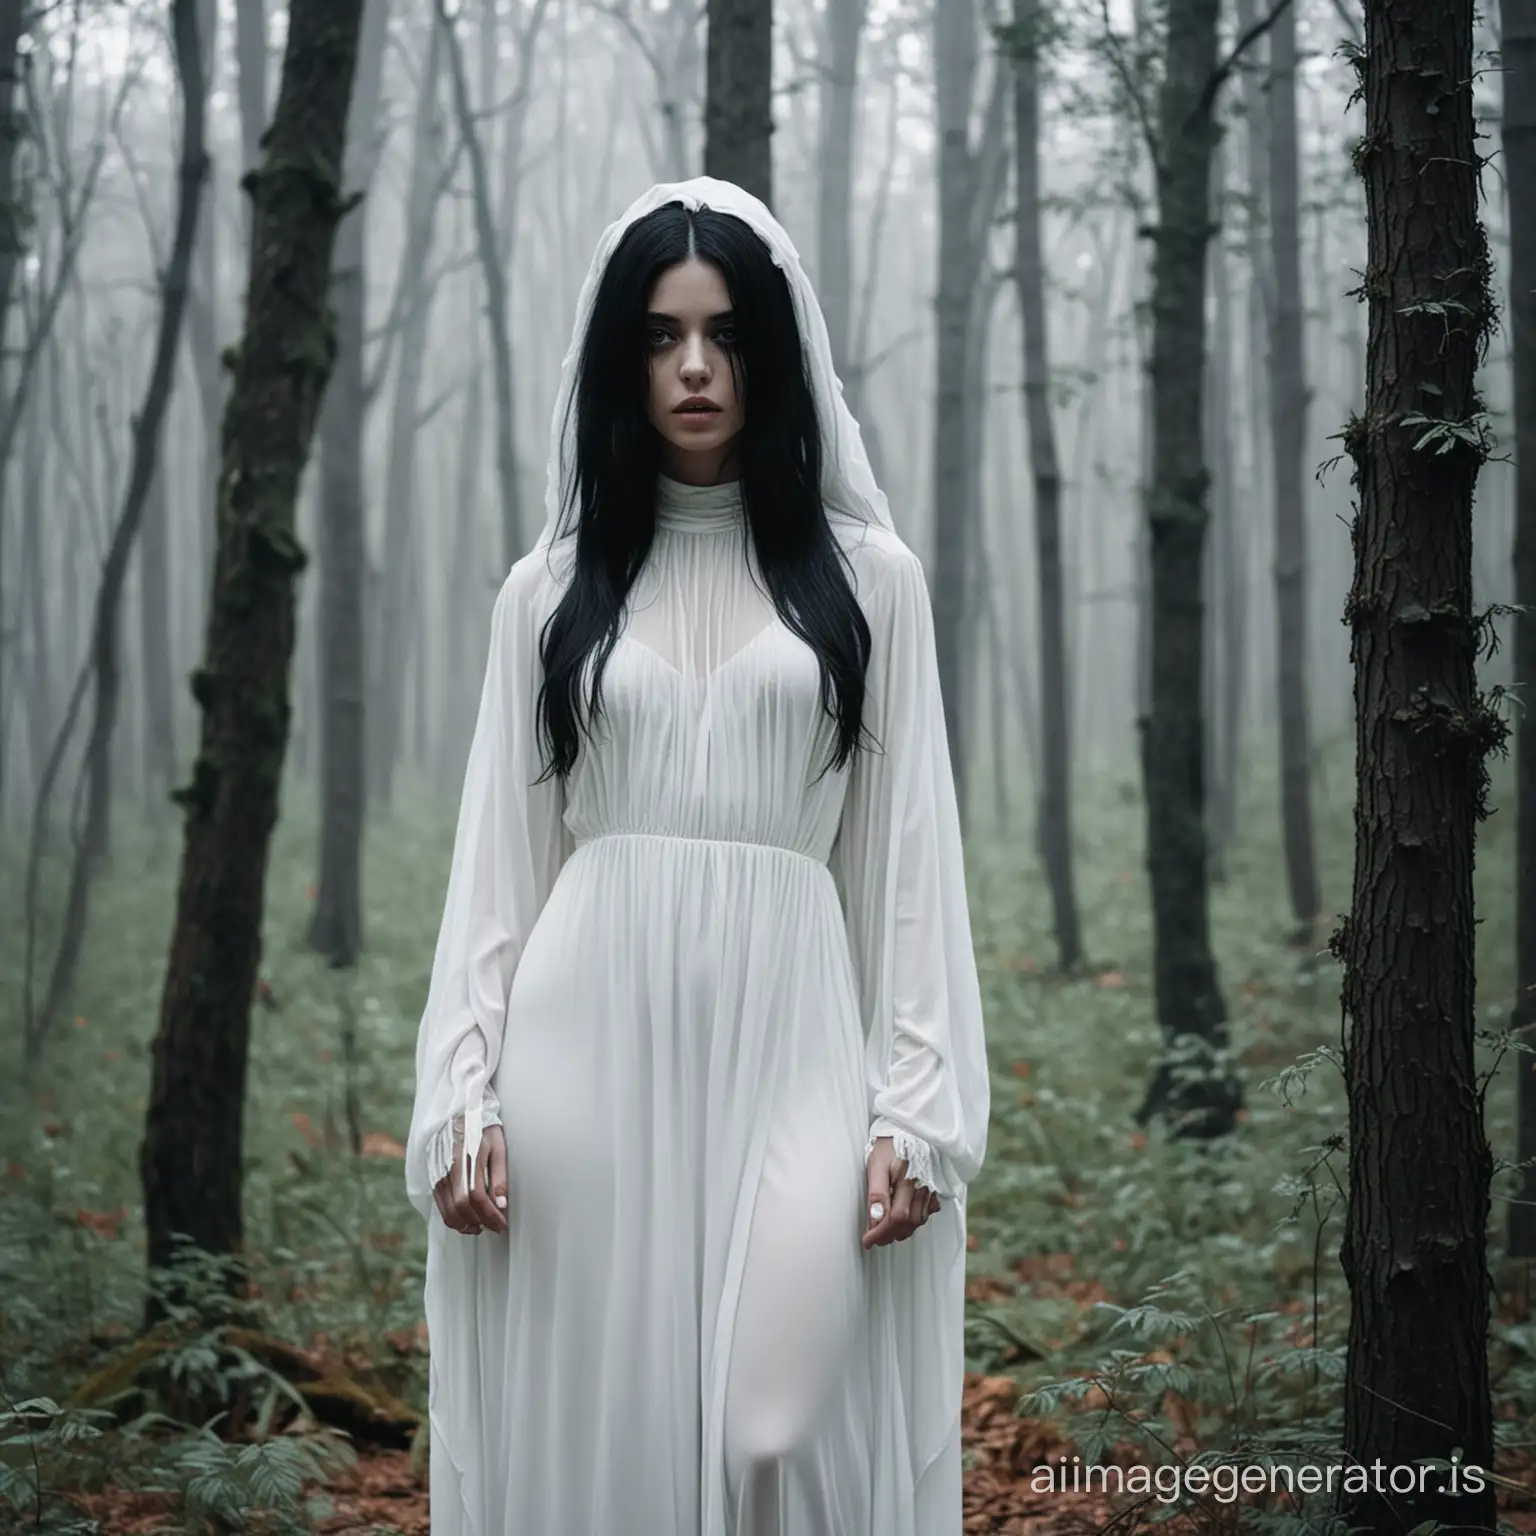 Mysterious-Pale-Woman-Surrounded-by-Sinister-Black-Spirits-in-a-Haunting-Forest